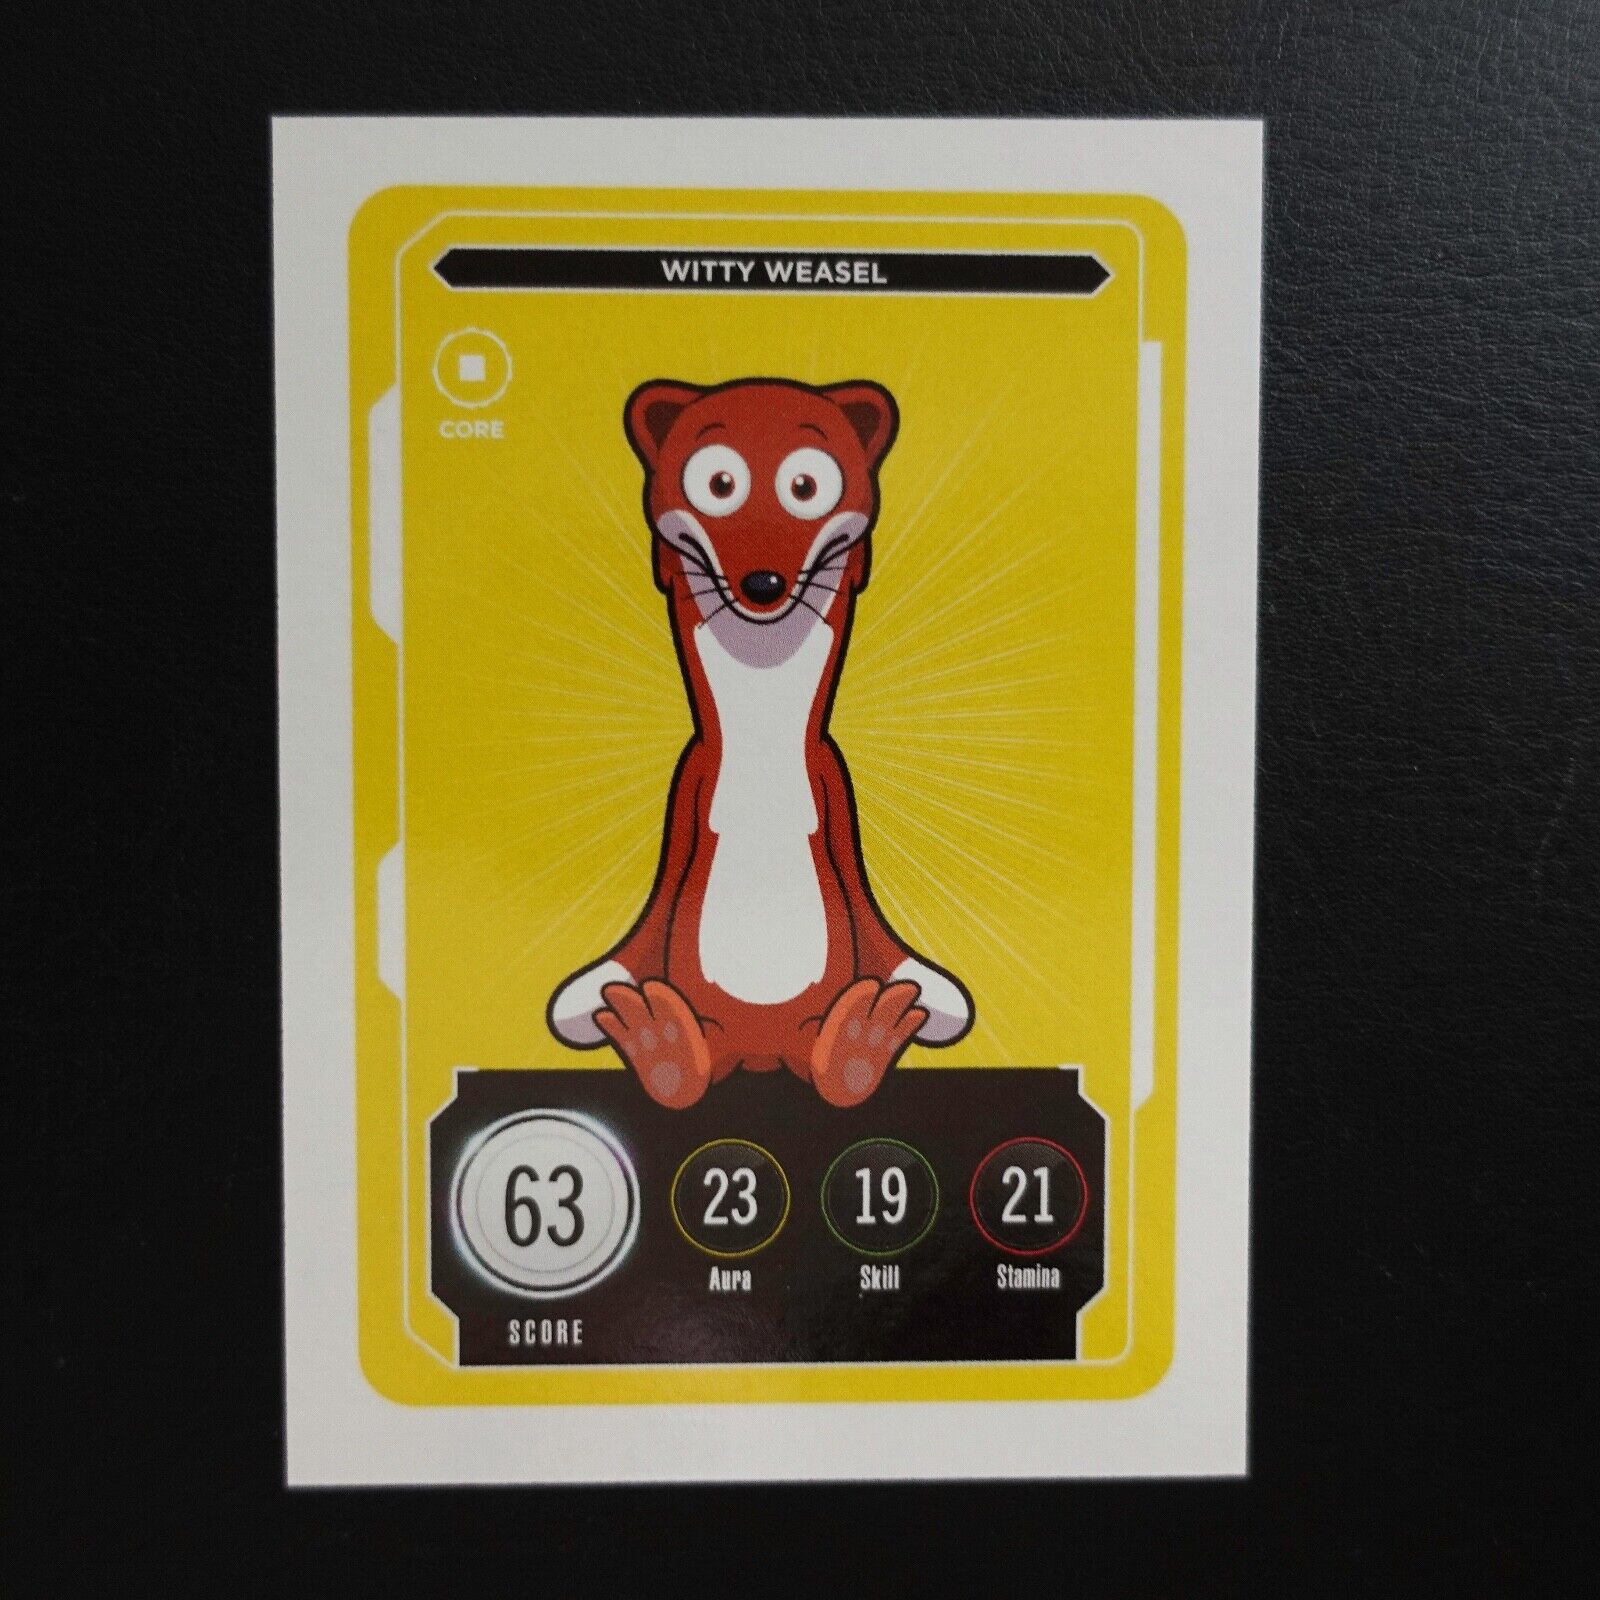 Witty Weasel Veefriends Series 2 Compete And Collect Trading Card Gary Vee